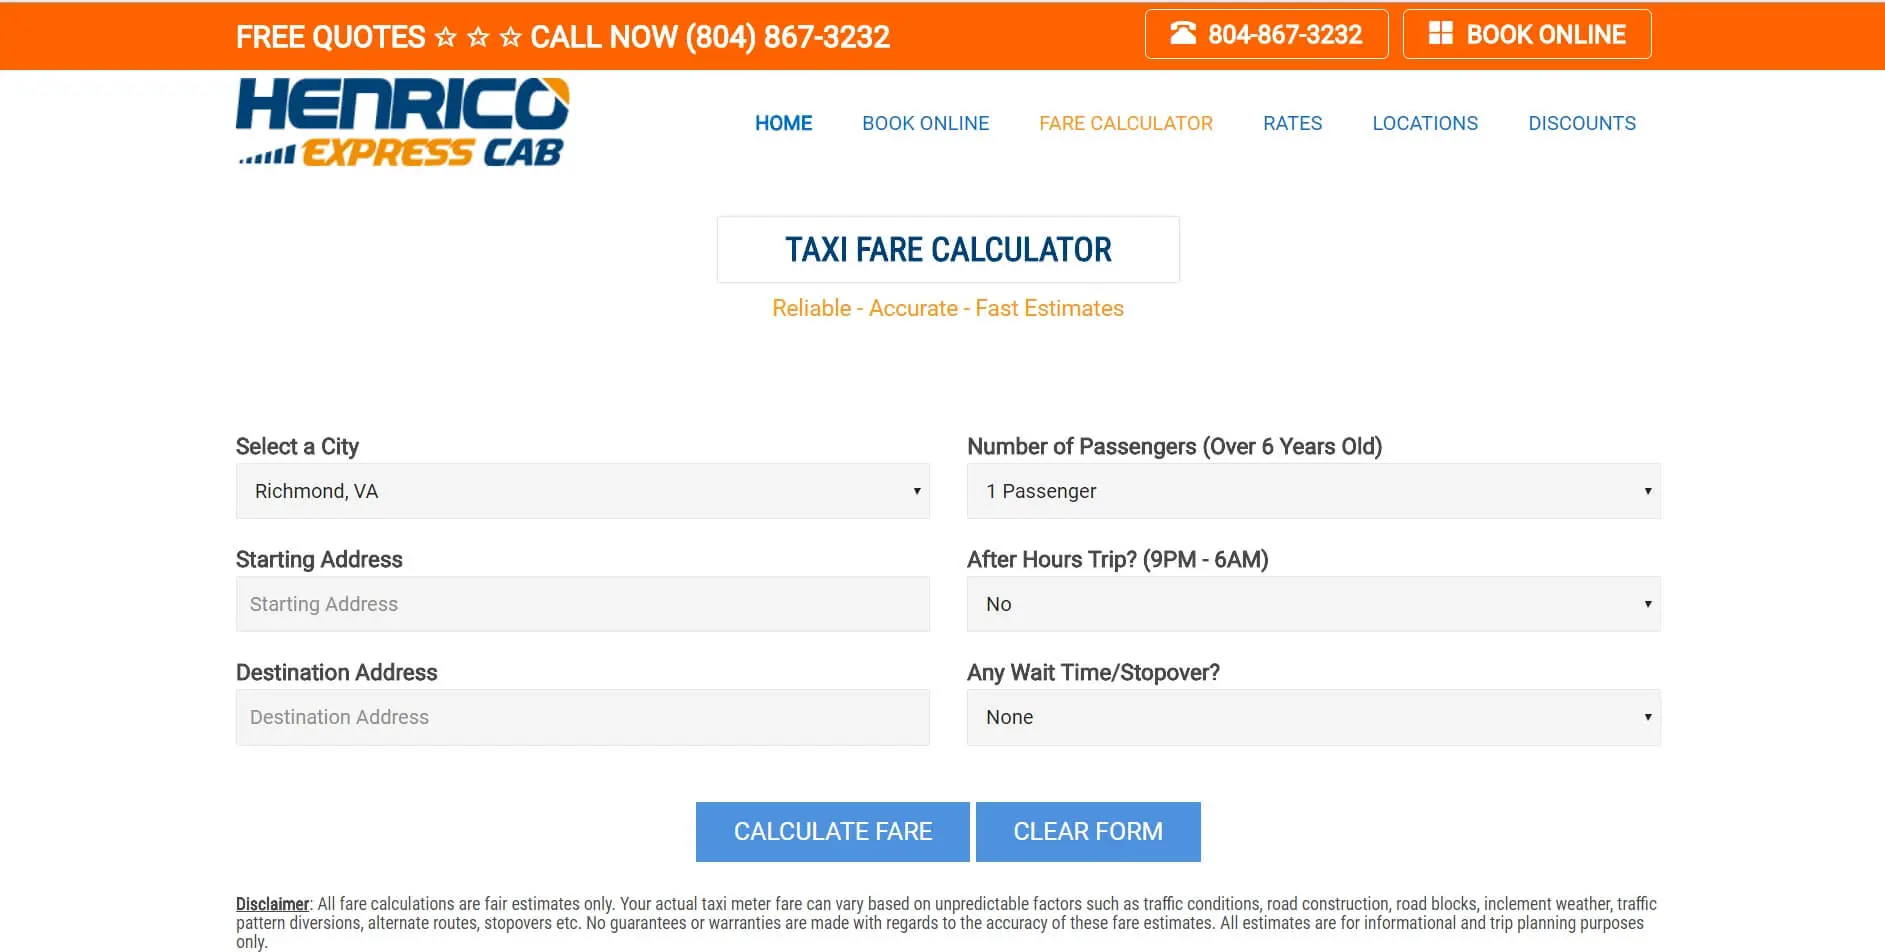 free now taxi fare calculator - Does FREE NOW cost more